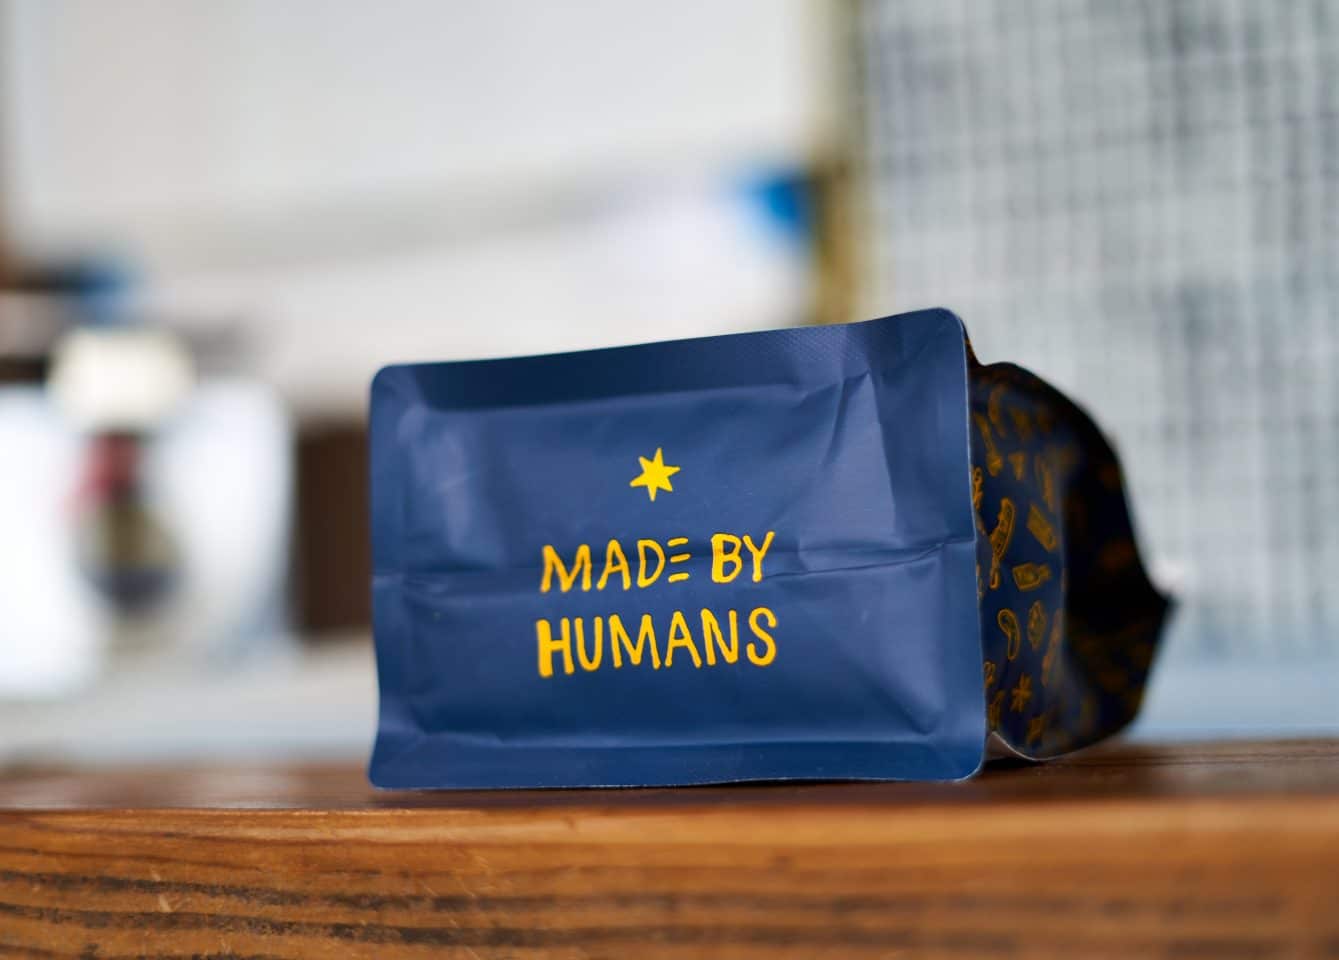 Metric "Made by Humans" bag